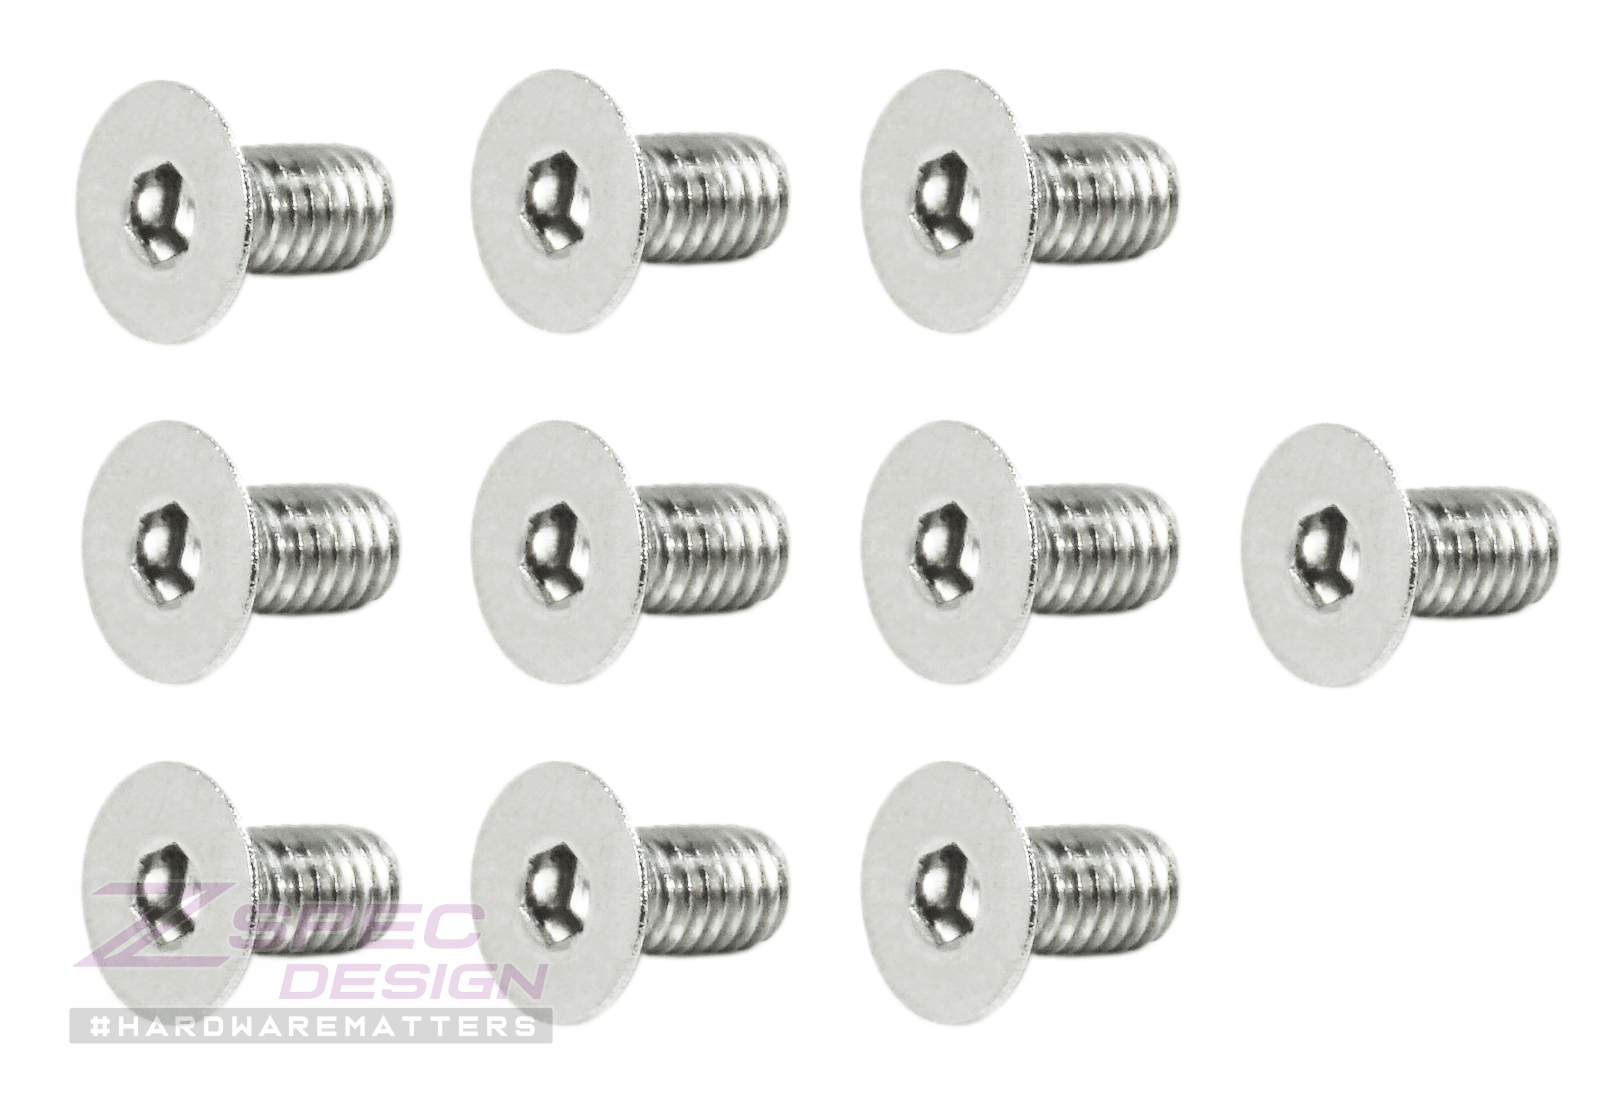 ZSPEC M4-0.7 Fasteners, FHSC, Stainless Steel SUS304, 10-Pack Hobby Engine Upgrade Metric Motorcycle Go Kart Radio Control Hobby